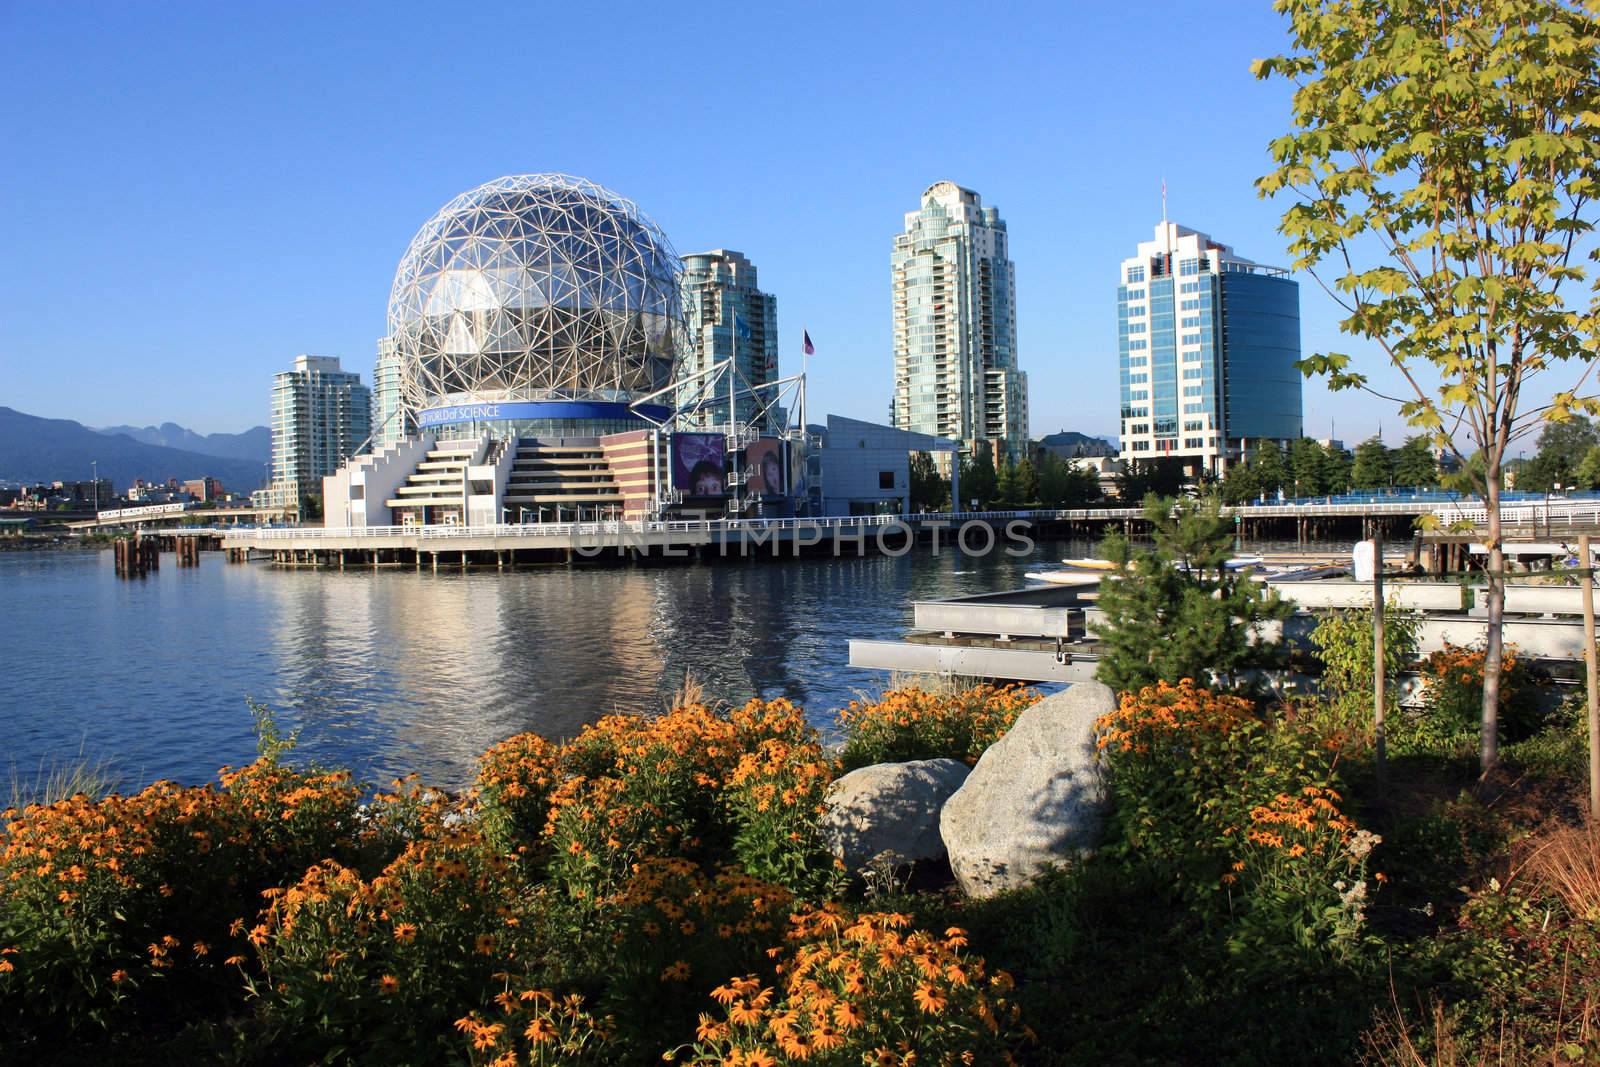 Science World In Vancouver (British Columbia, Canada)